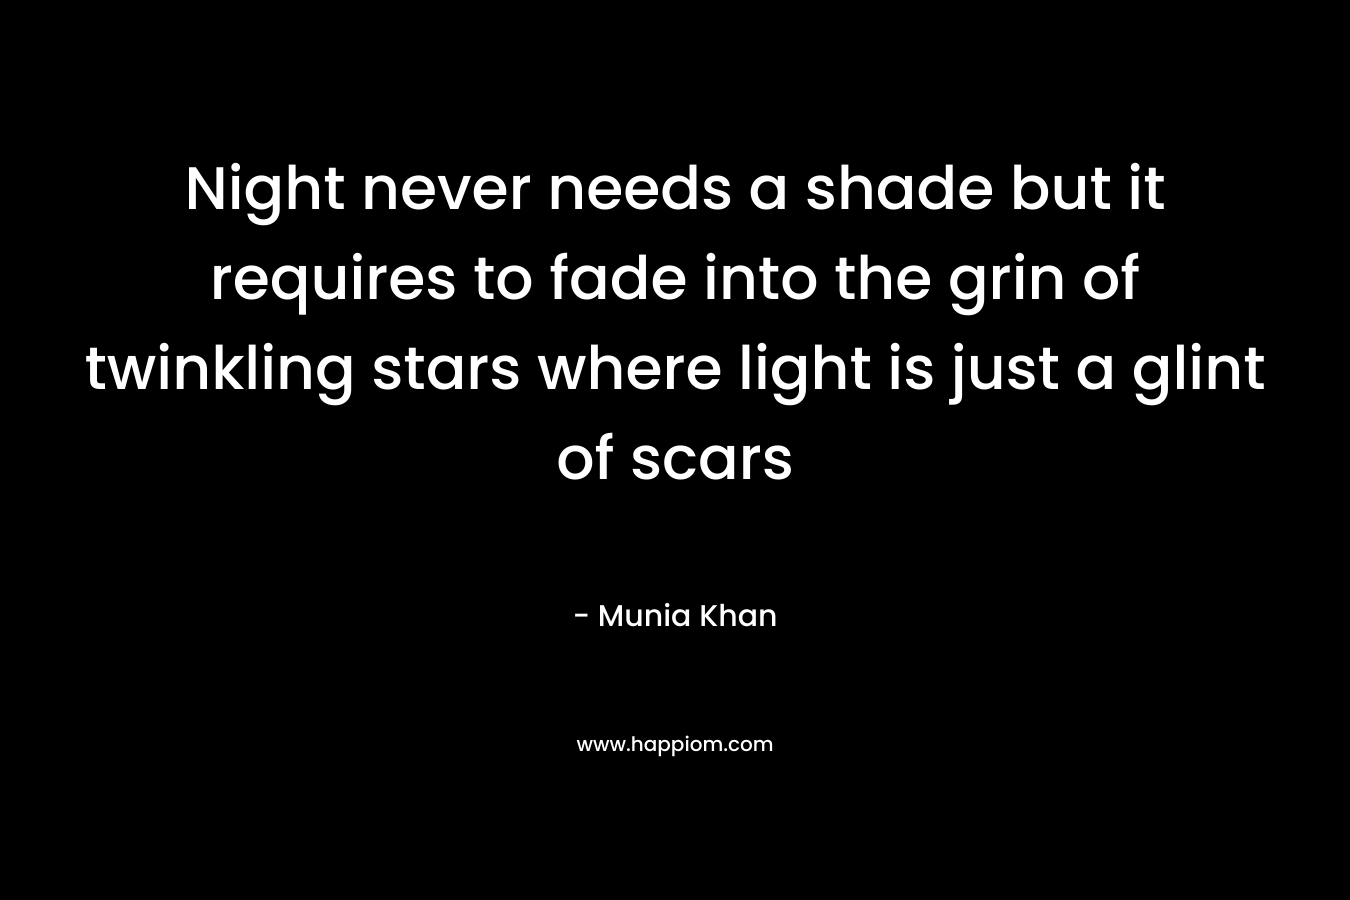 Night never needs a shade but it requires to fade into the grin of twinkling stars where light is just a glint of scars – Munia Khan